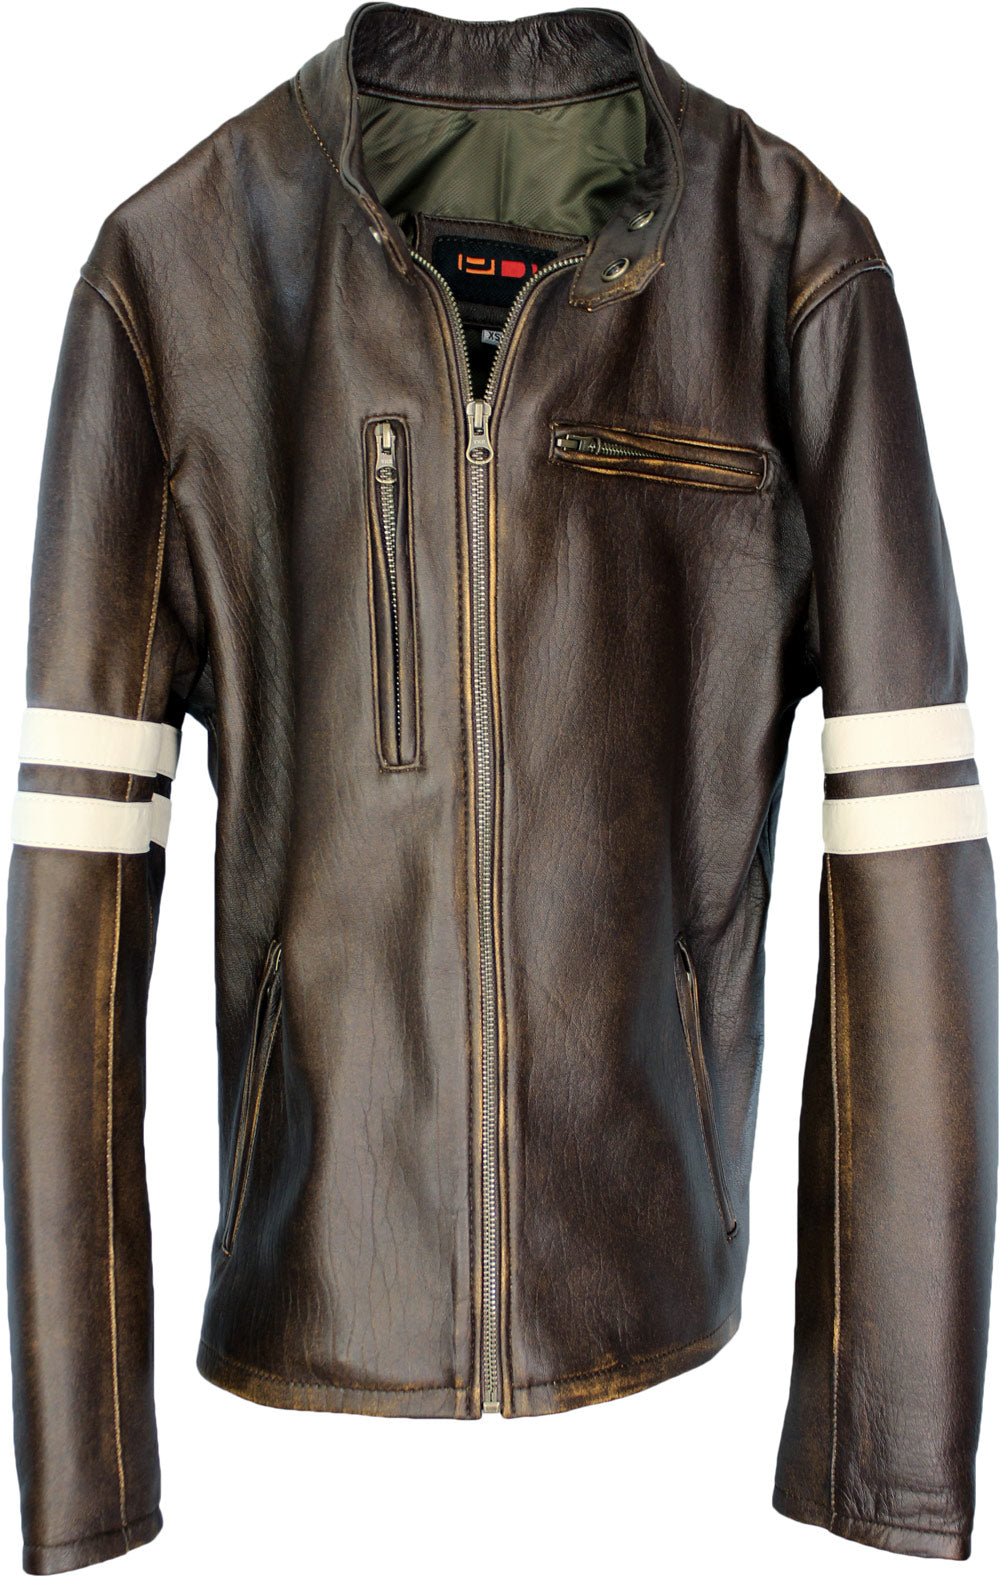 MUSTANG Leather Jacket Distressed Online - Leatherwear PDCollection - Shop Cafe Racer Stripes– Brown